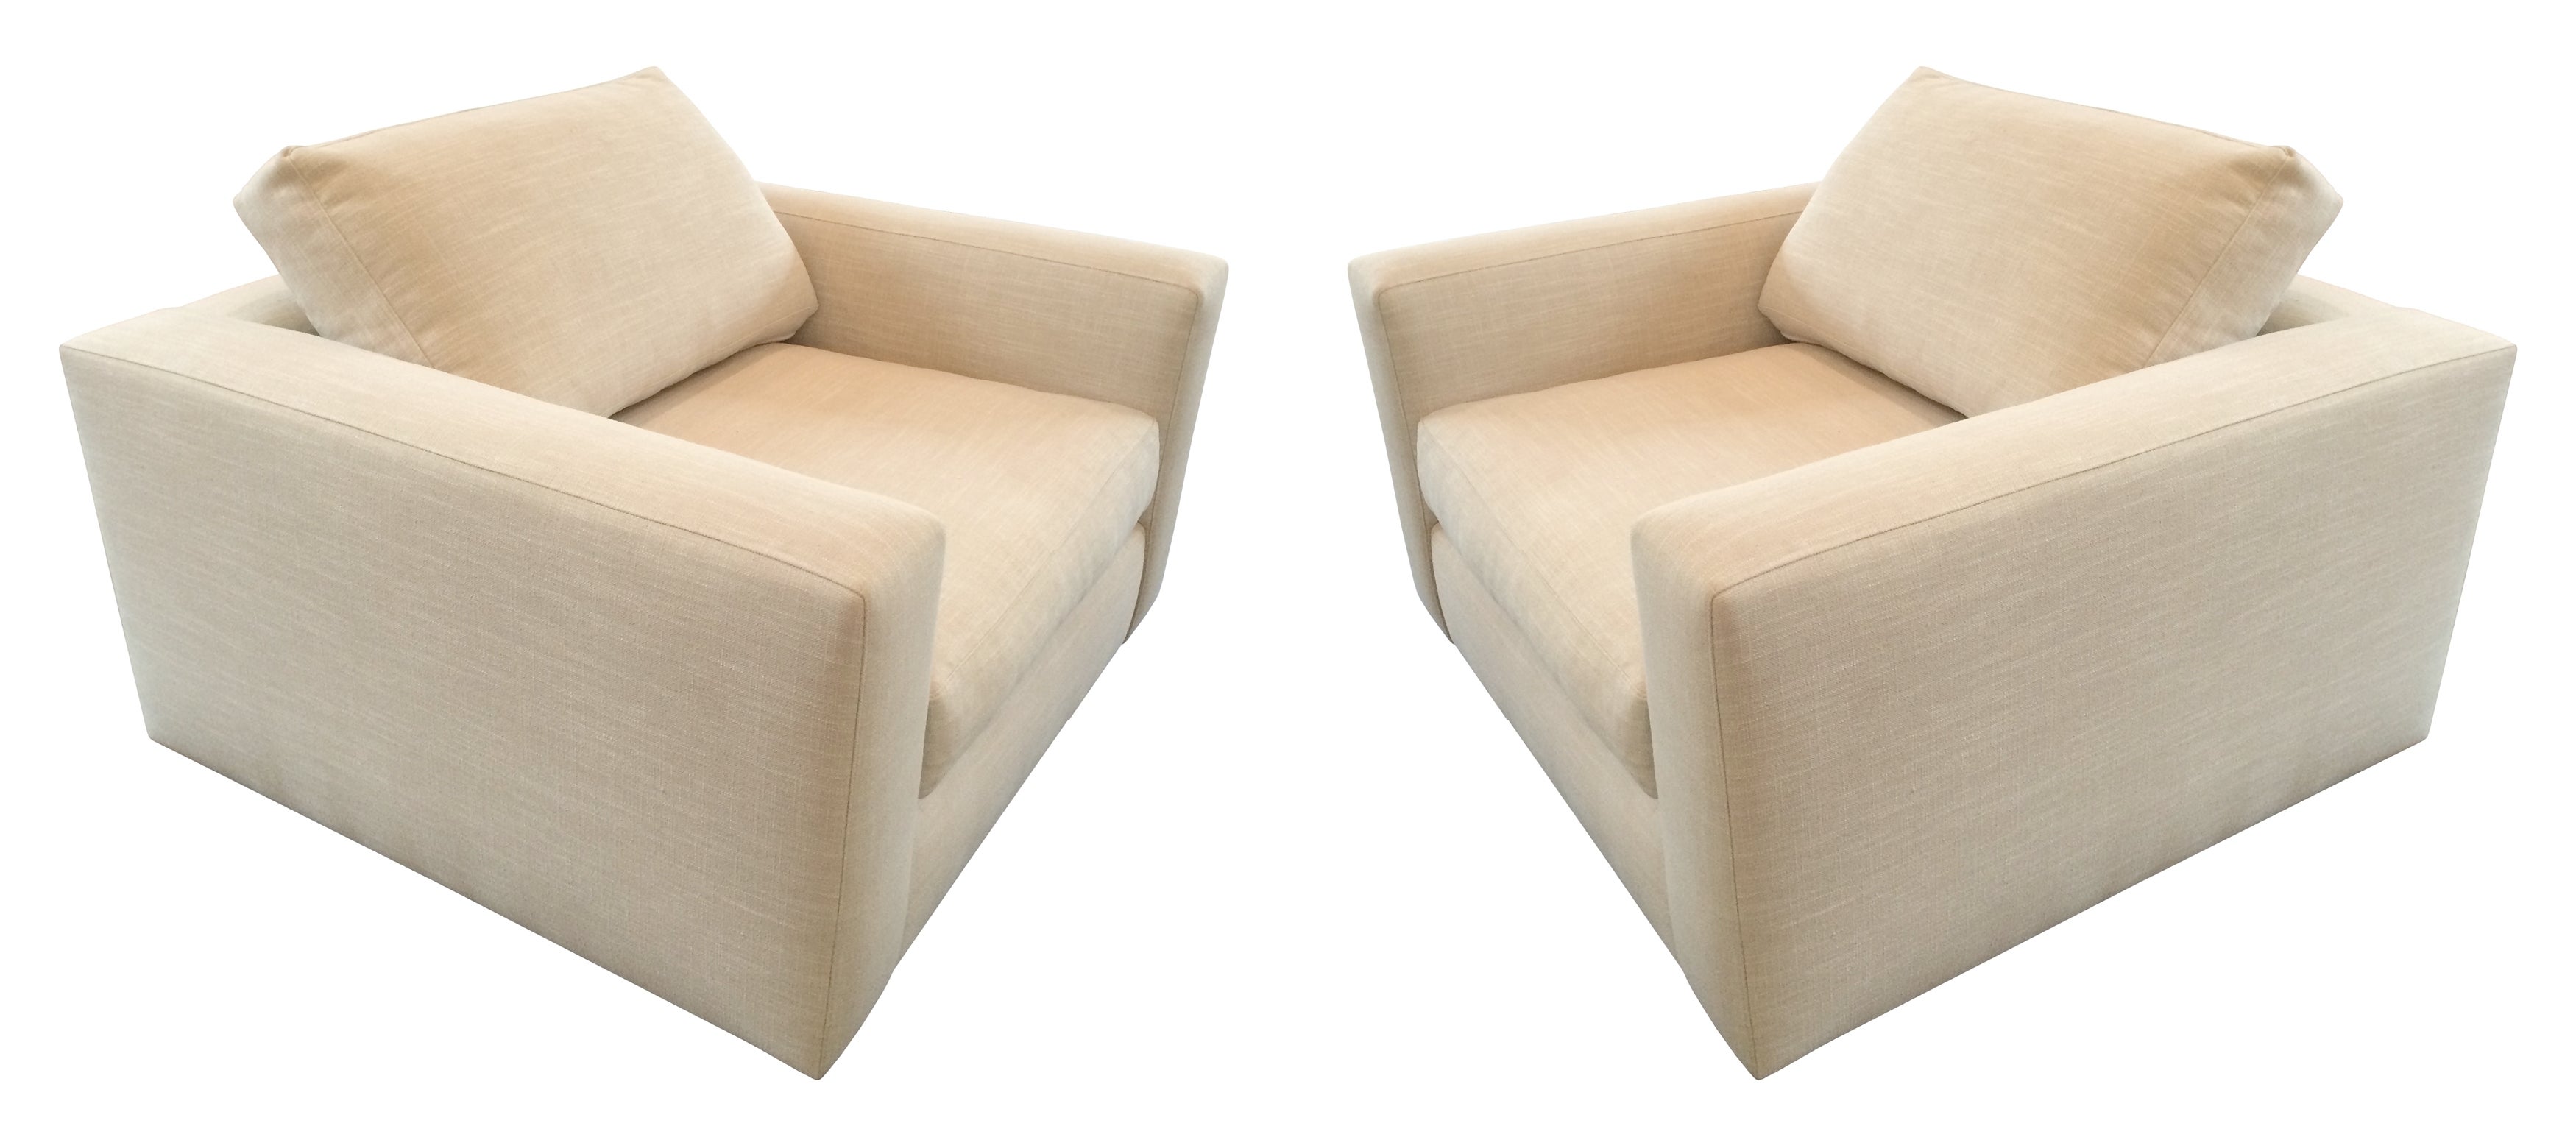 Stunning Pair of Wide Lounge Chairs in Cream Linen Upholstery For Sale